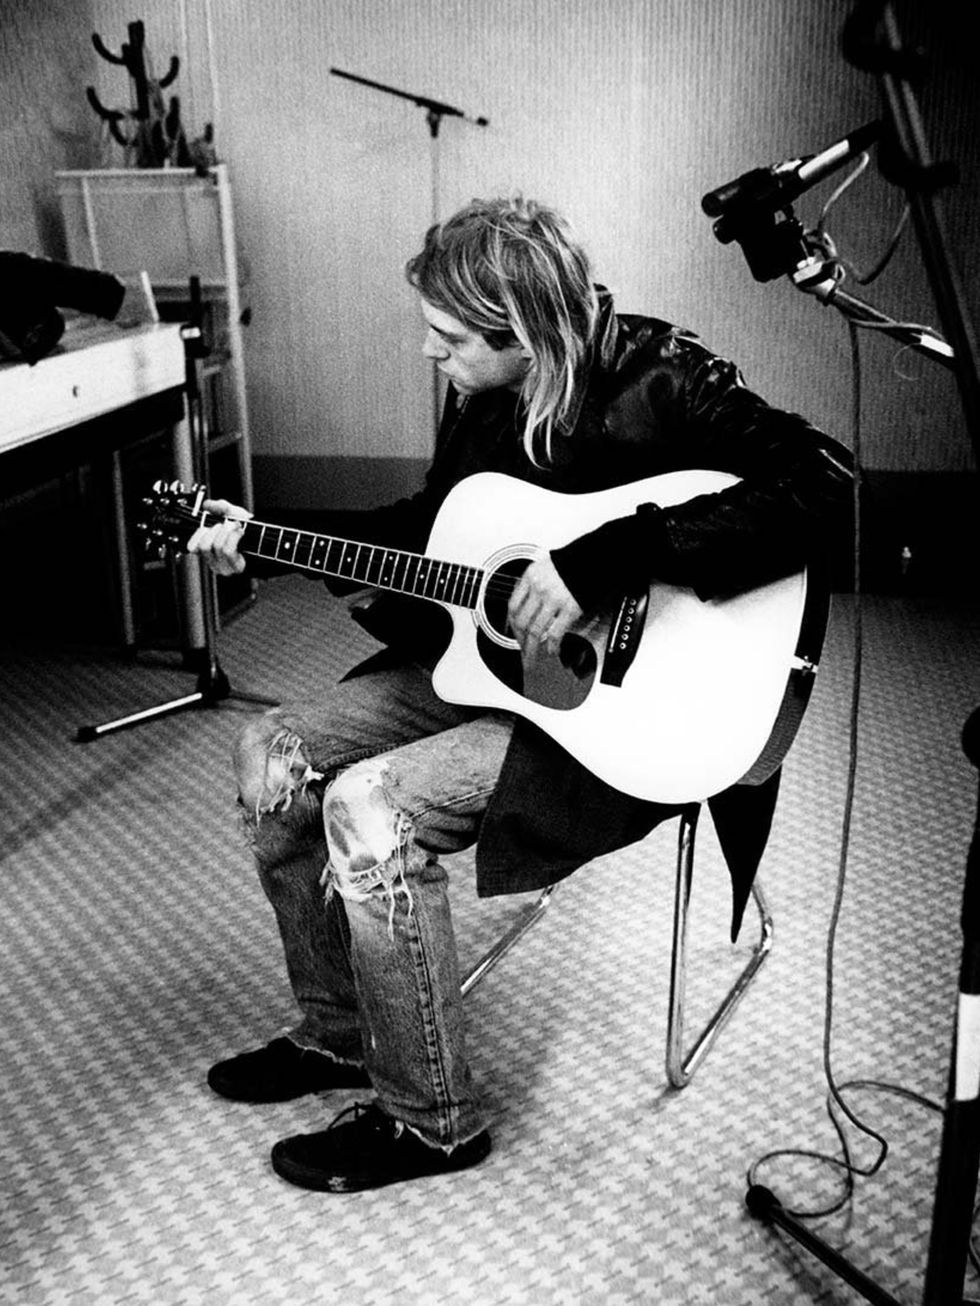 <p><strong>Kurt Cobain, 1991</strong></p><p>Ripped denim accessorised with a guitar. Be still our beating hearts.</p>